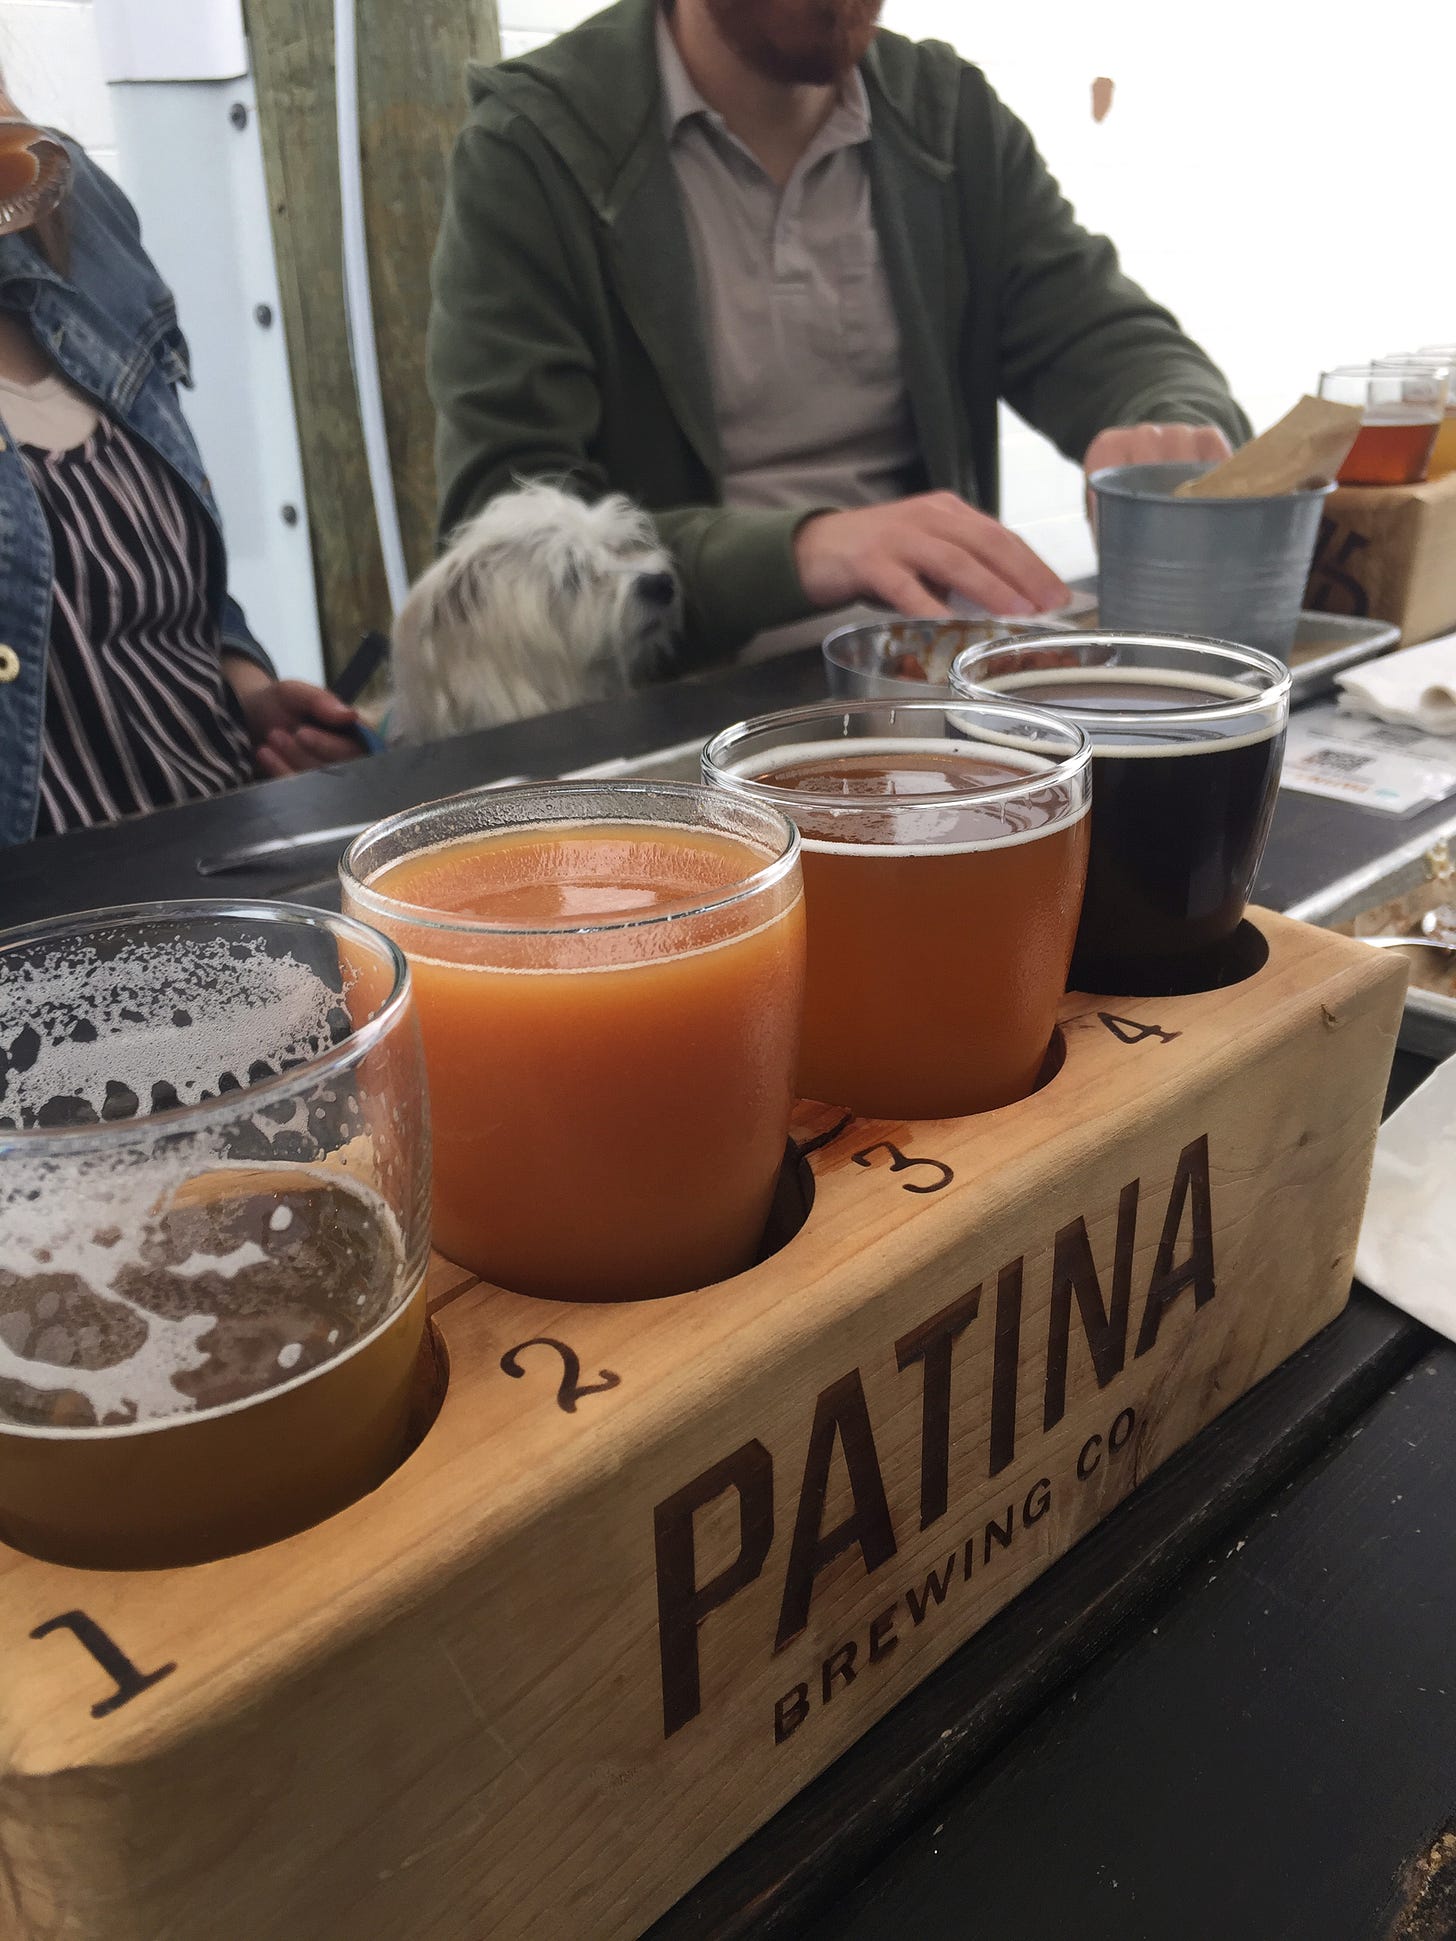 A flight of a variety of different-coloured beers in a wooden block that reads "Patina Brewing Co." In the background, Jesse and Krystyna are partially visible with their white dog, Wally, sitting between them.